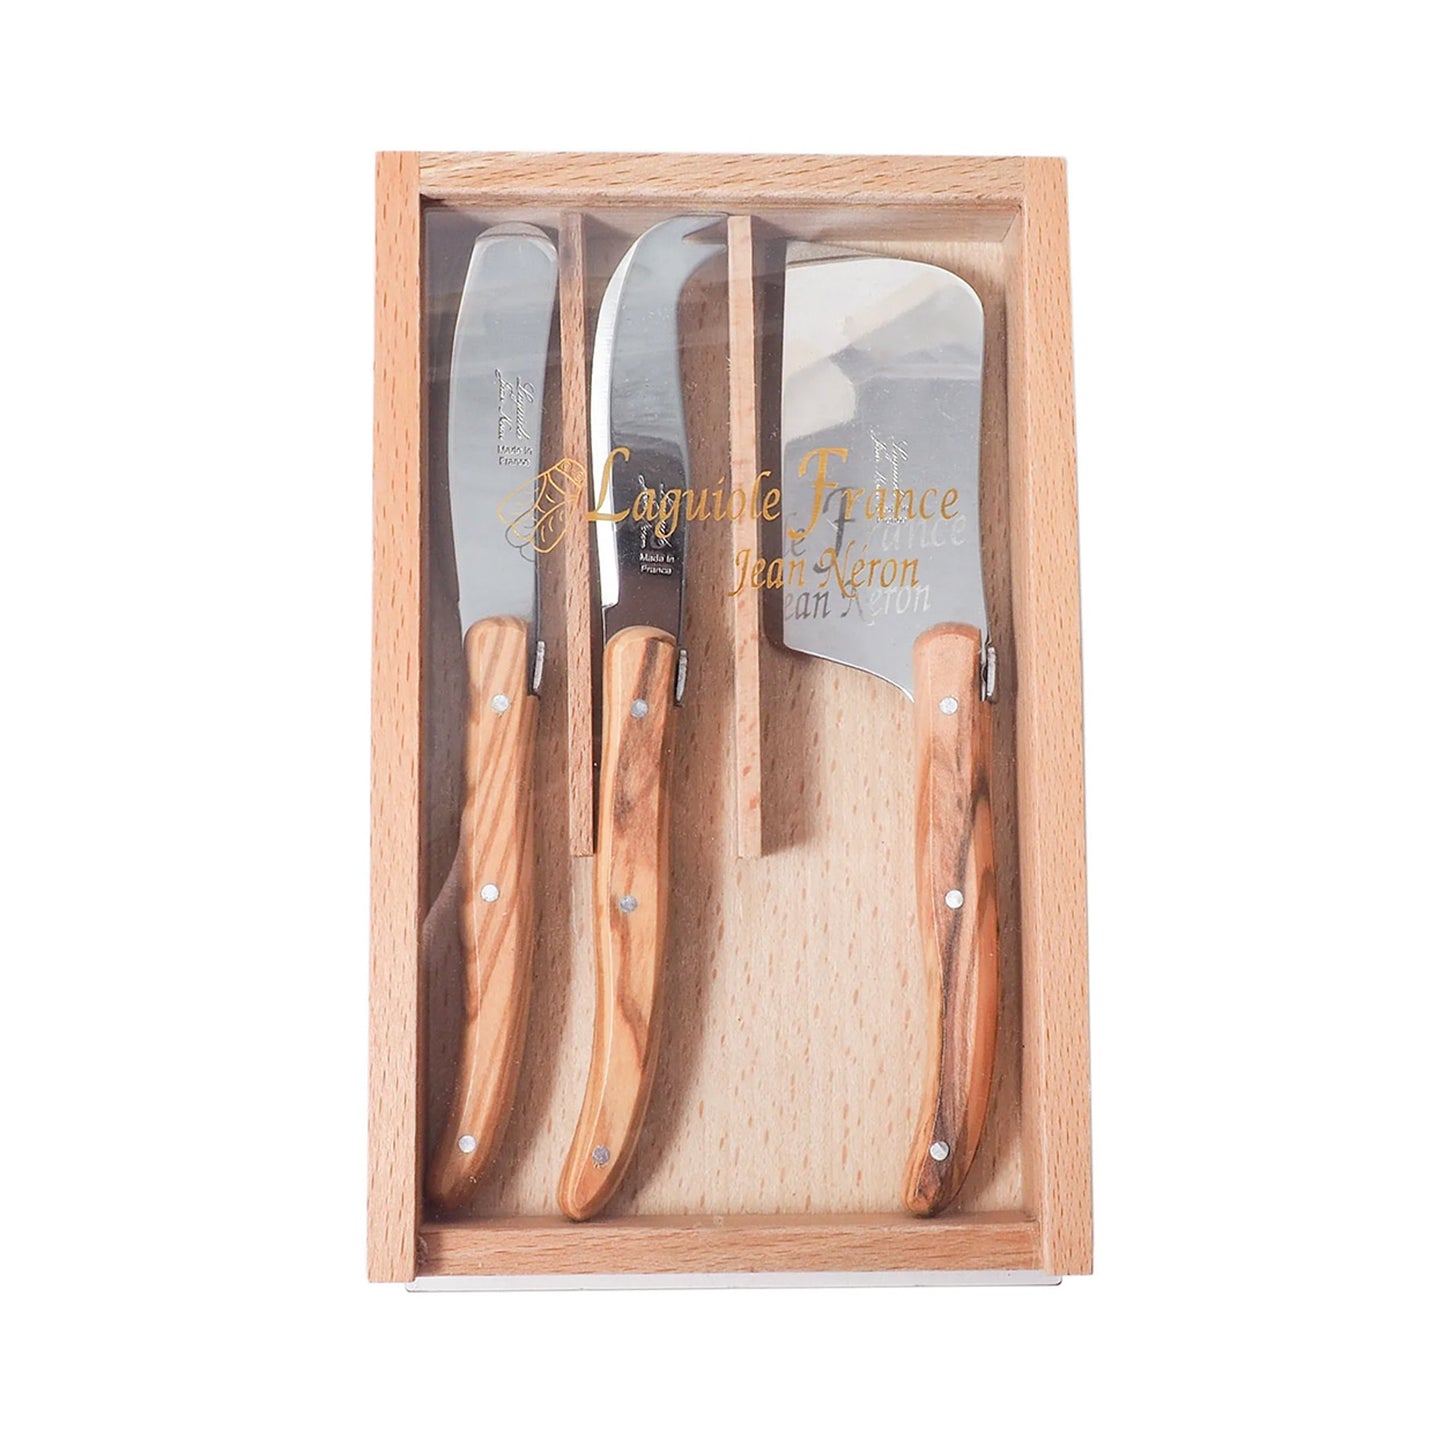 Laguoile Cheese Knife Set-Olivewood